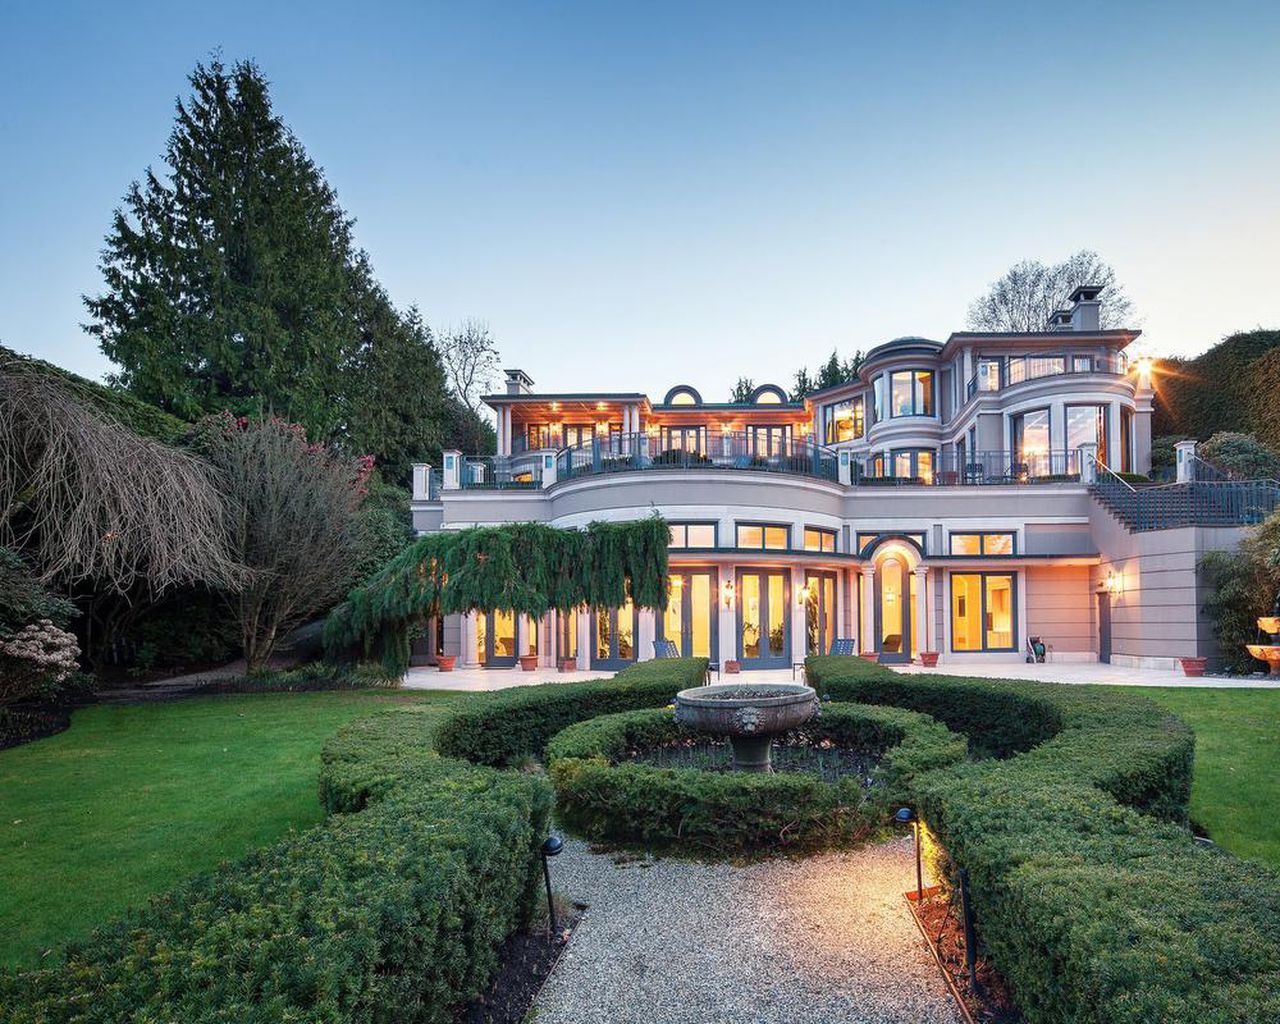 Inside the dream home: How a teenaged fishmonger built his family a $58 million mansion on Vancouver's Billionaires' Row